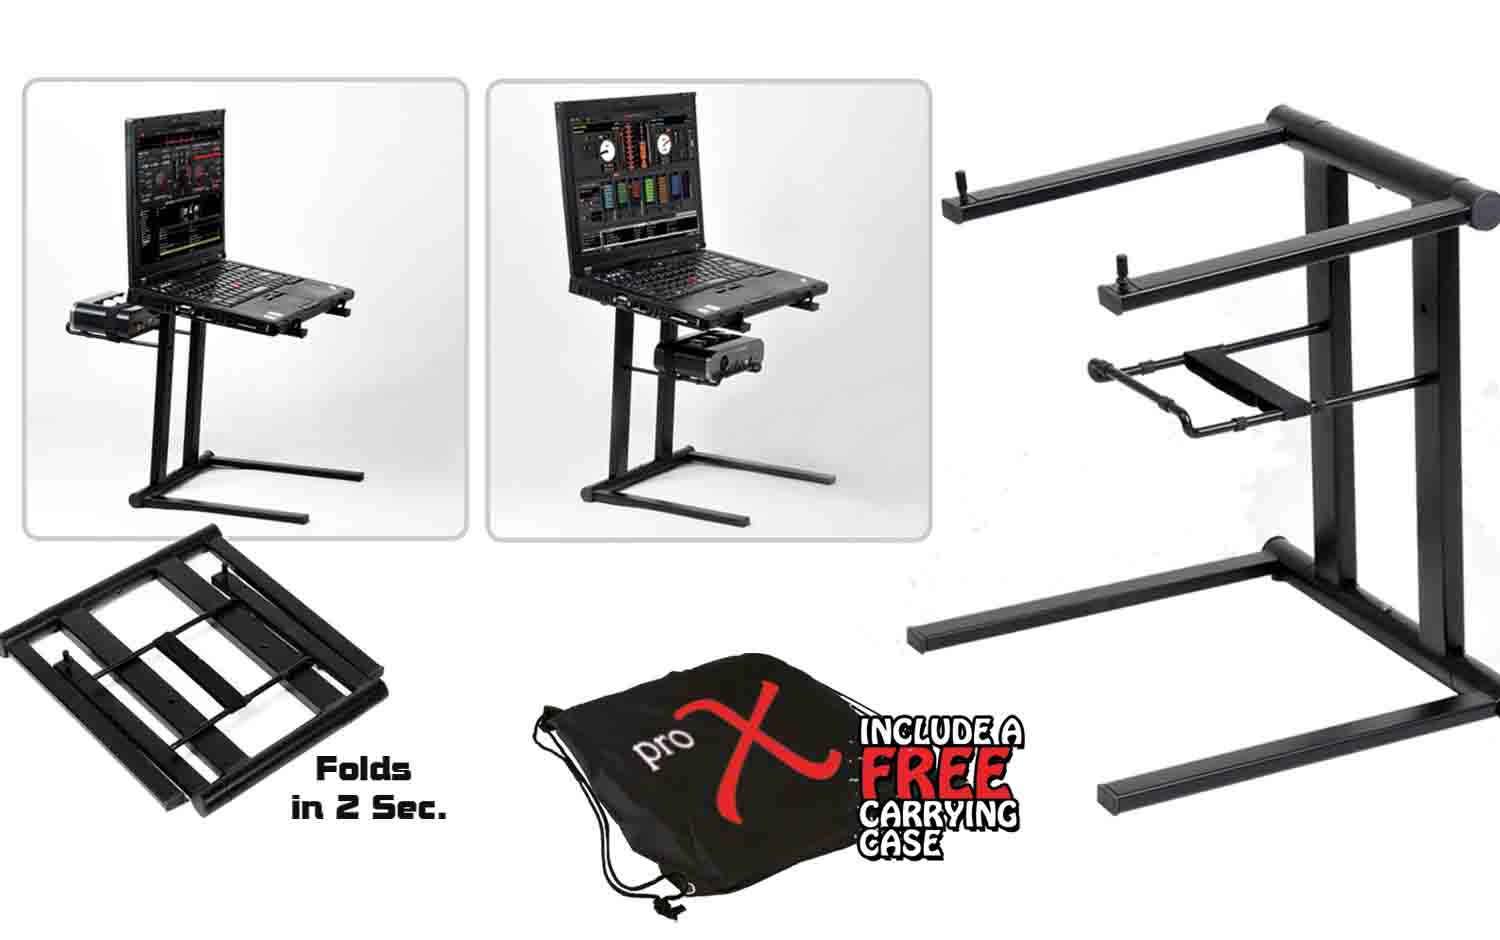 ProX T-LPS600B Foldable Portable Laptop Stand with Adjustable Shelf - Black by ProX Cases